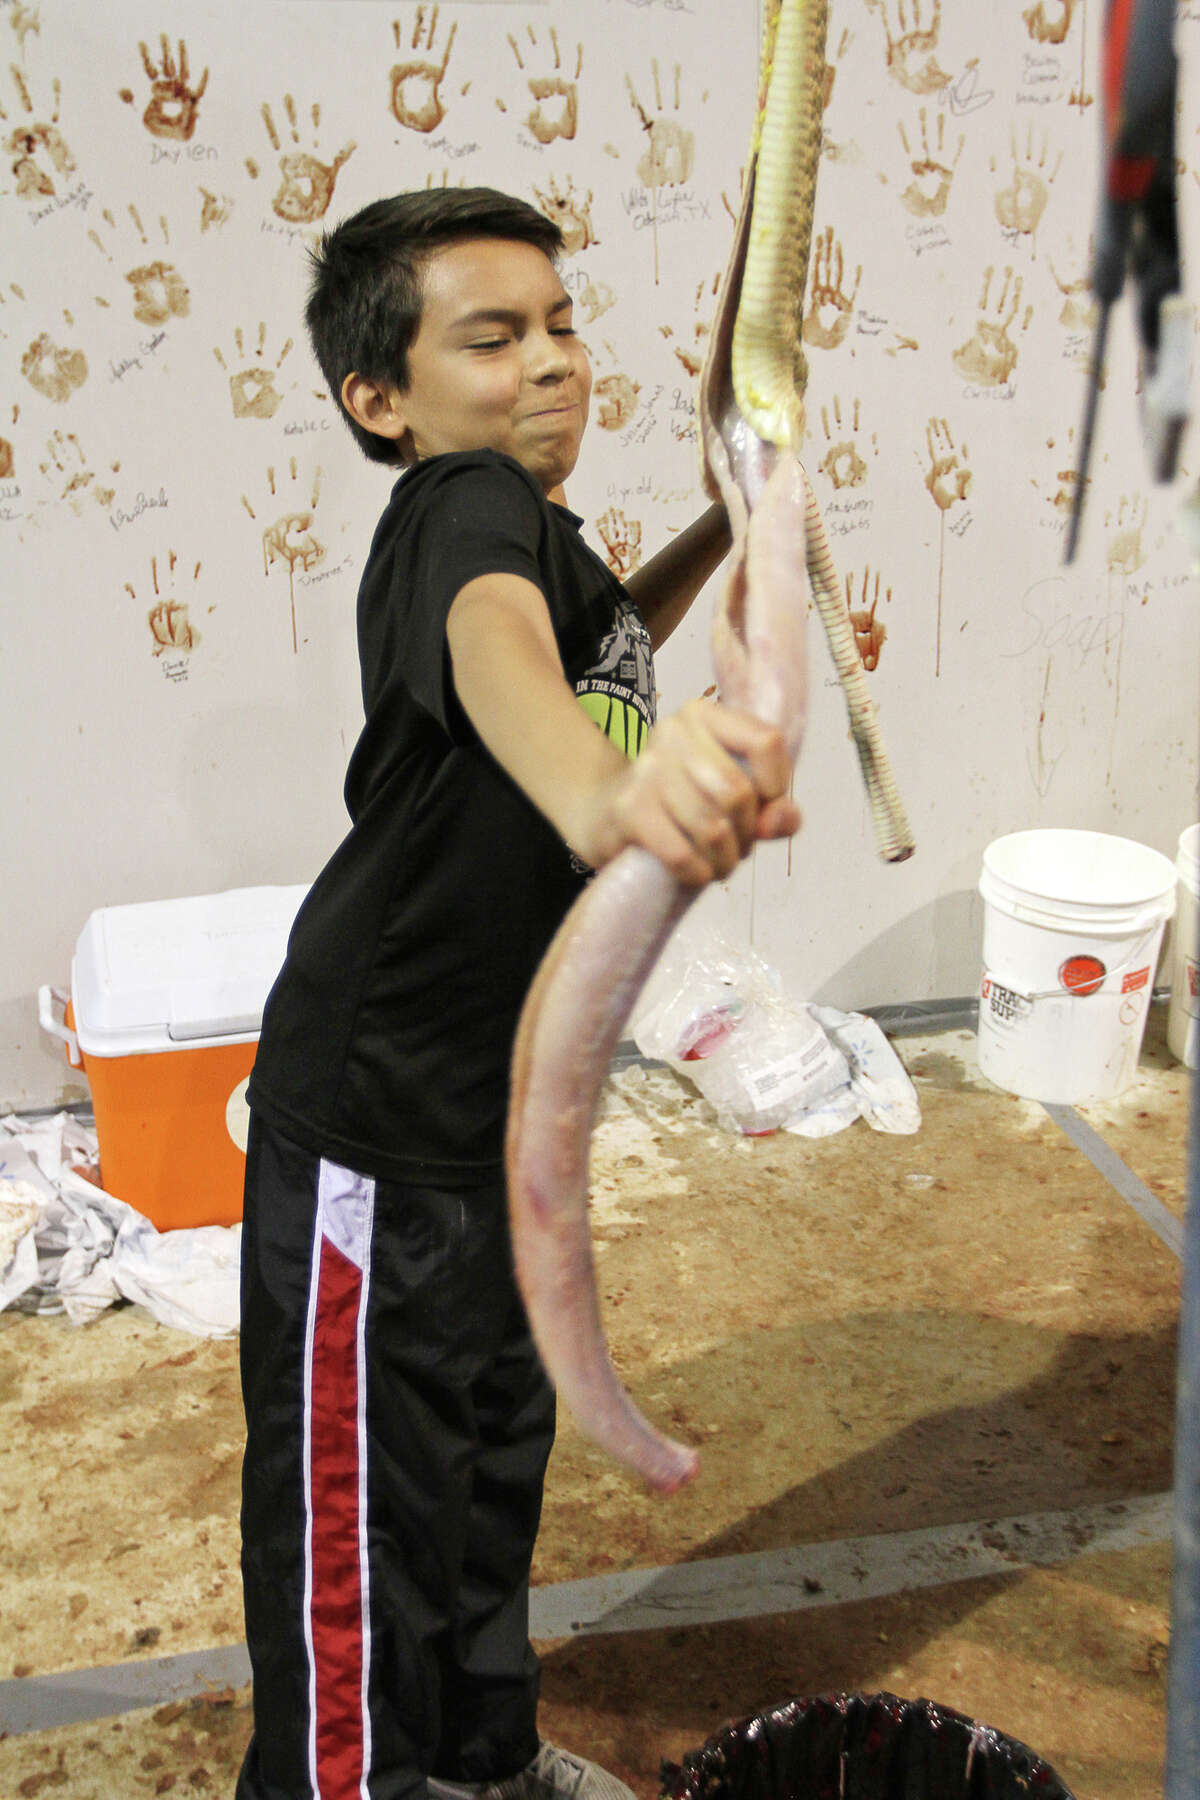 Dawson Rains, 12 skins a western diamondback rattlesnake at the skinning station at the 58th annual Sweetwater Jaycee's World's Largest Rattlesnake Round-Up on Saturday, March 12, 2016, at the Nolan County Coliseum in Sweetwater, Texas.